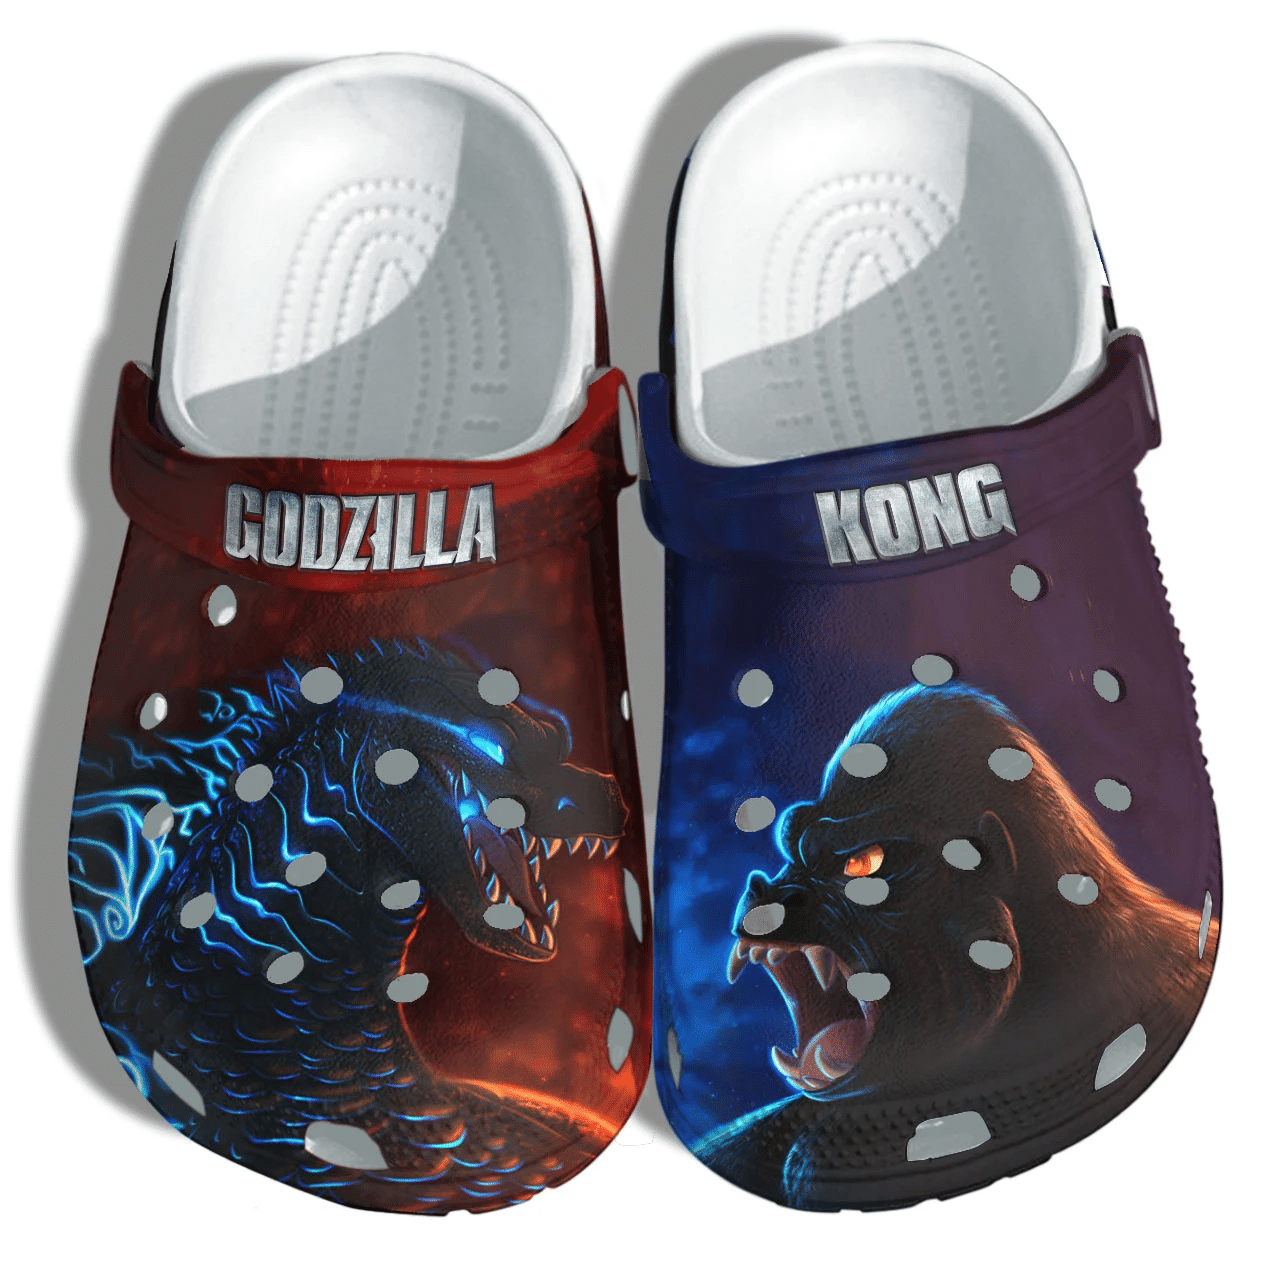 Godzilla Kong Monster Shoes Crocs Funny For Men Women – King Monster Croc Shoes Gifts Fathers Day